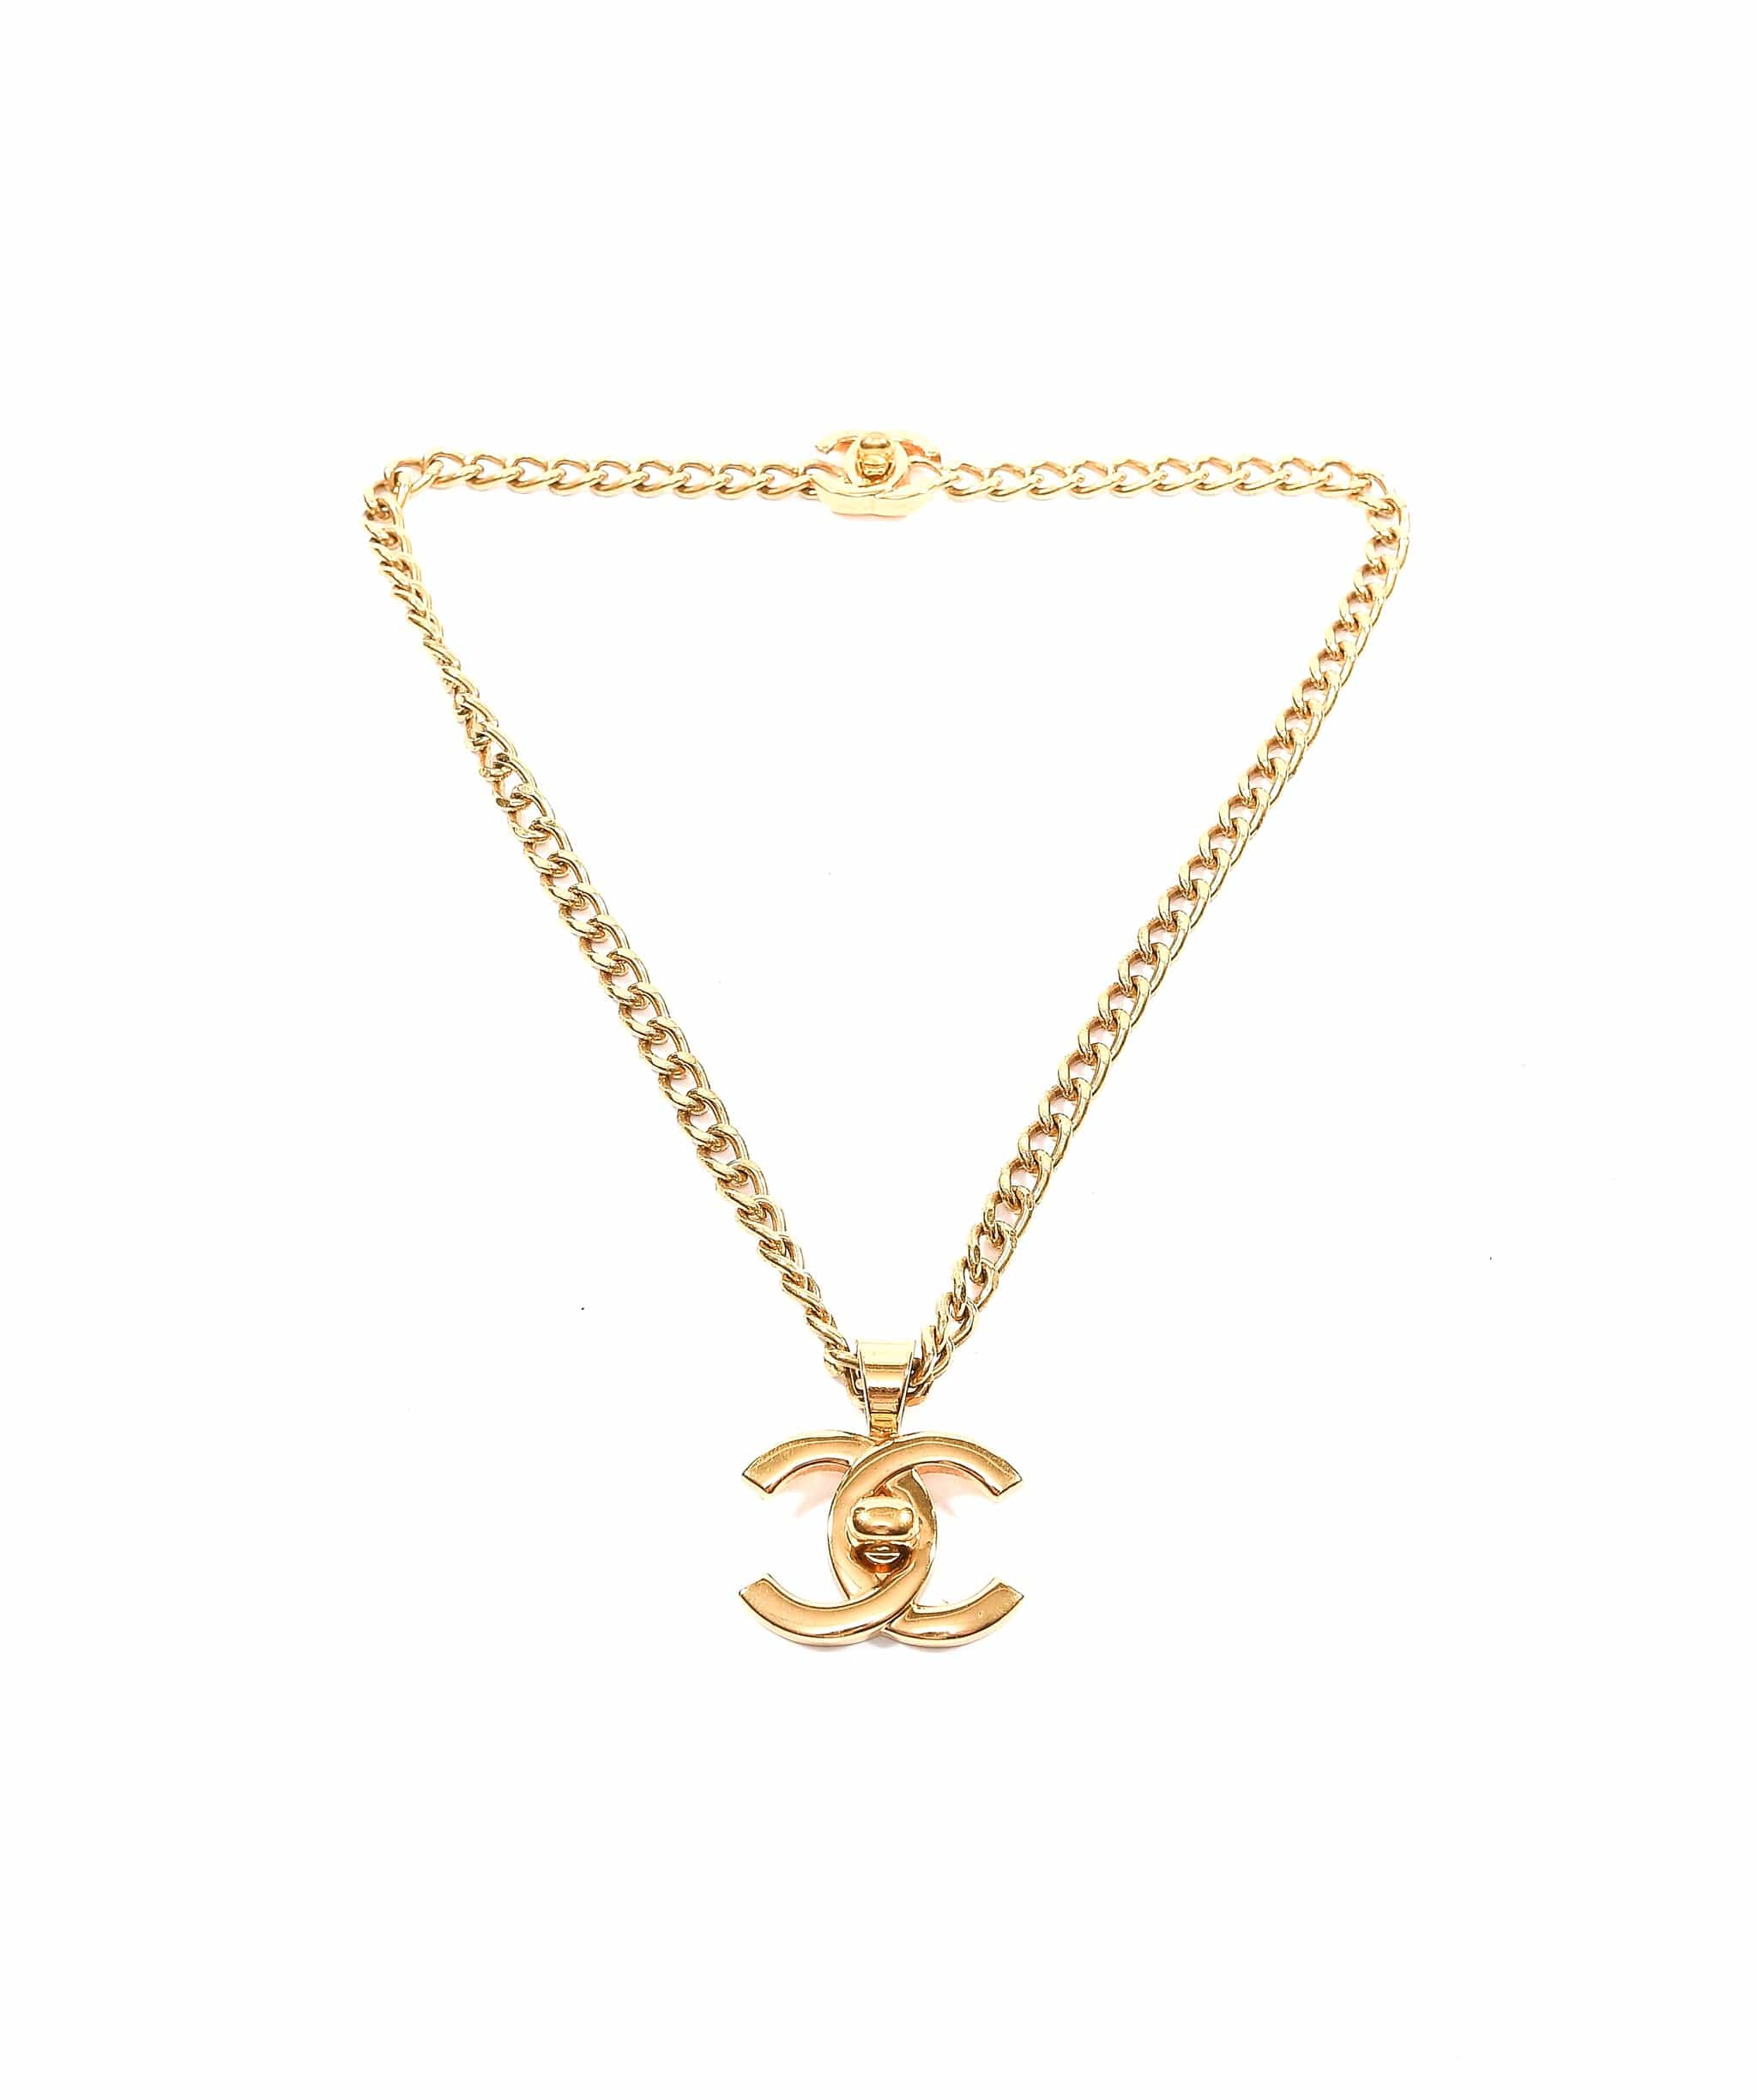 Chanel Chanel turnlock CC long necklace - AWL3333